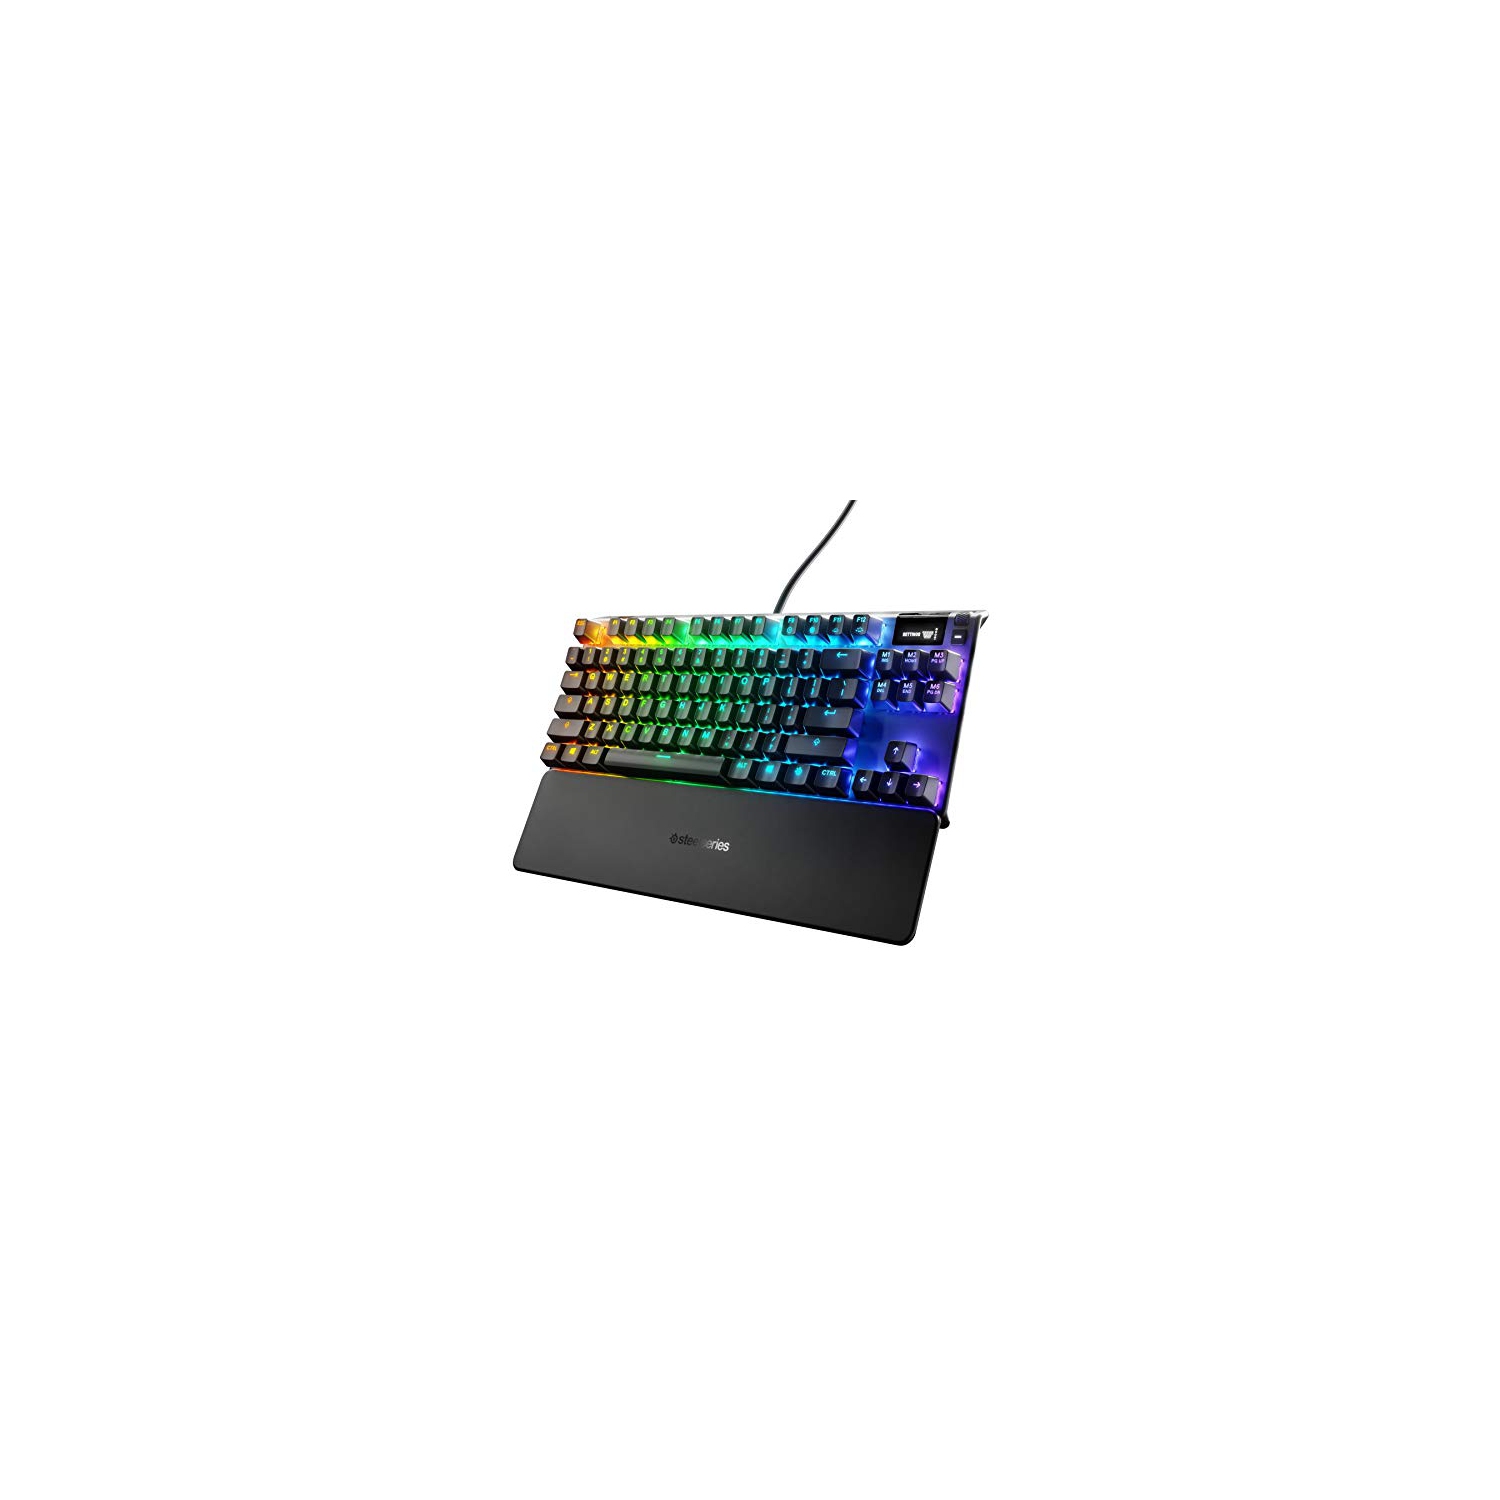 SteelSeries Apex 7 TKL Compact Mechanical Gaming Keyboard – OLED Smart Display – USB Passthrough and Media Controls –...